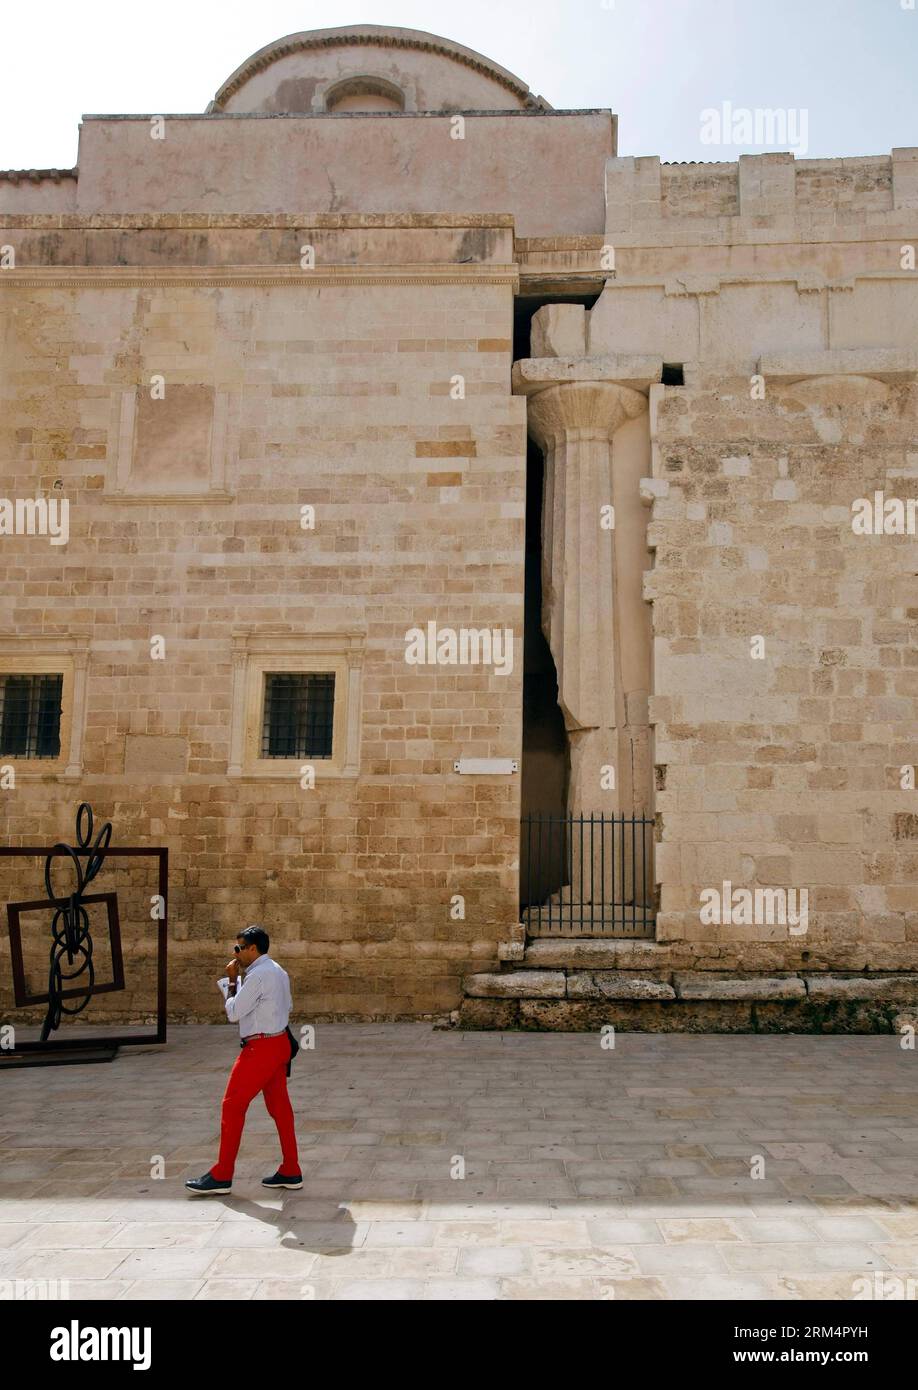 Bildnummer: 60506292  Datum: 20.09.2013  Copyright: imago/Xinhua (130920) -- SYRACUSE, Sept. 20, 2013 (Xinhua) -- A man walks past the Cathedral, formerly the great Temple of Athena (5th century BC), in Ortigia, the old town of Syracuse in Sicily, Italy, Sept. 5, 2013. Located in the southeast corner of the island of Sicily, Syracuse is a historic city in Italy. The 2,700-year-old city founded in 734 or 733 BC by Greek settlers from Corinth and Tenea played a key role in ancient times when it was one of the major powers of the Mediterranean world. Once described by Cicero, renowned Roman philo Stock Photo